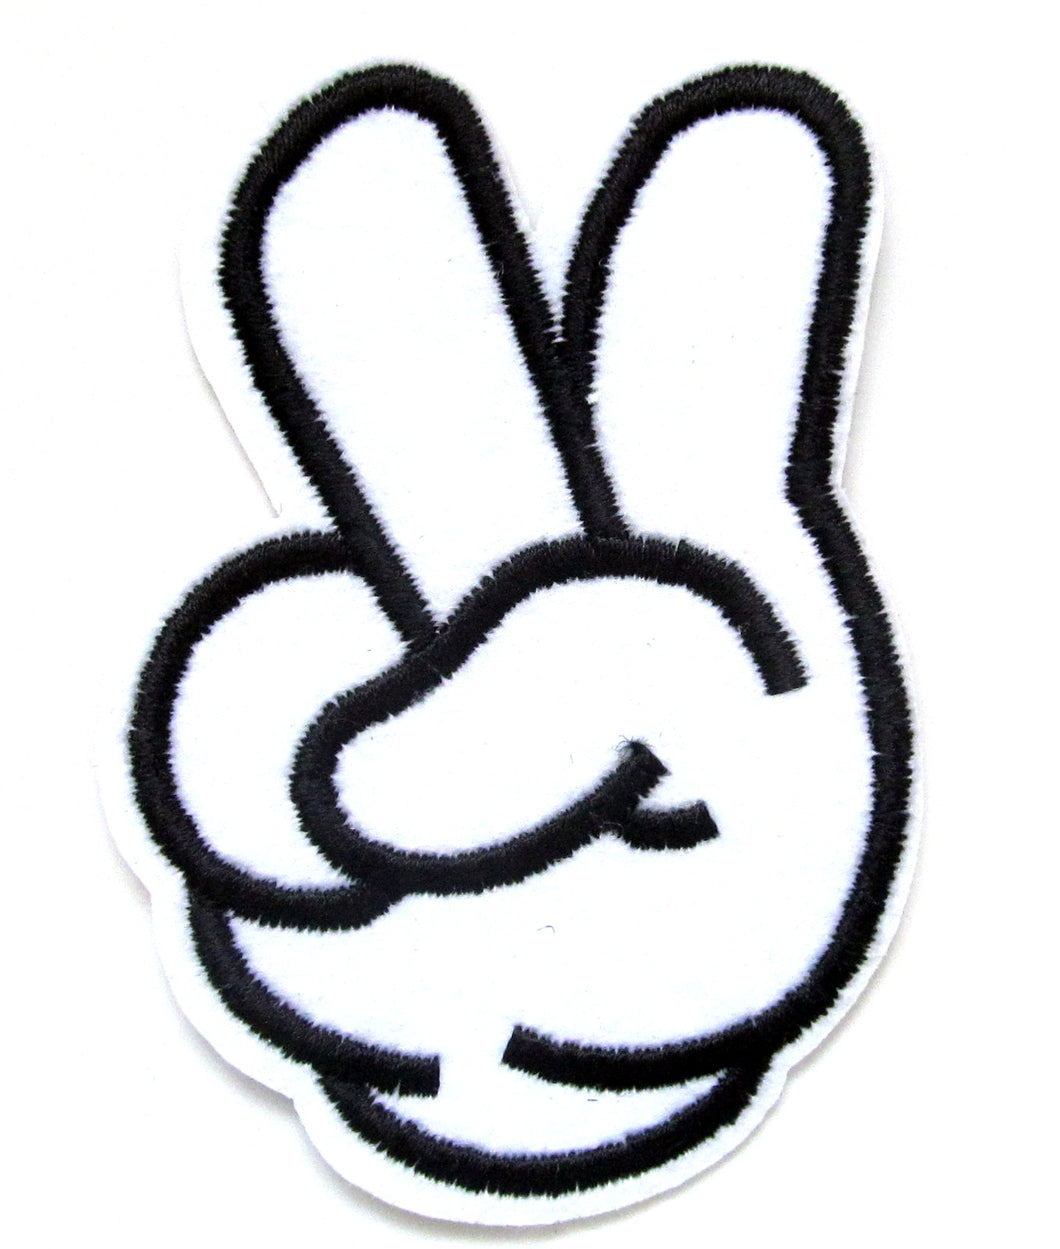 Cartoon Peace Hand Iron On Patch- Embroidered Symbol White Applique Badge